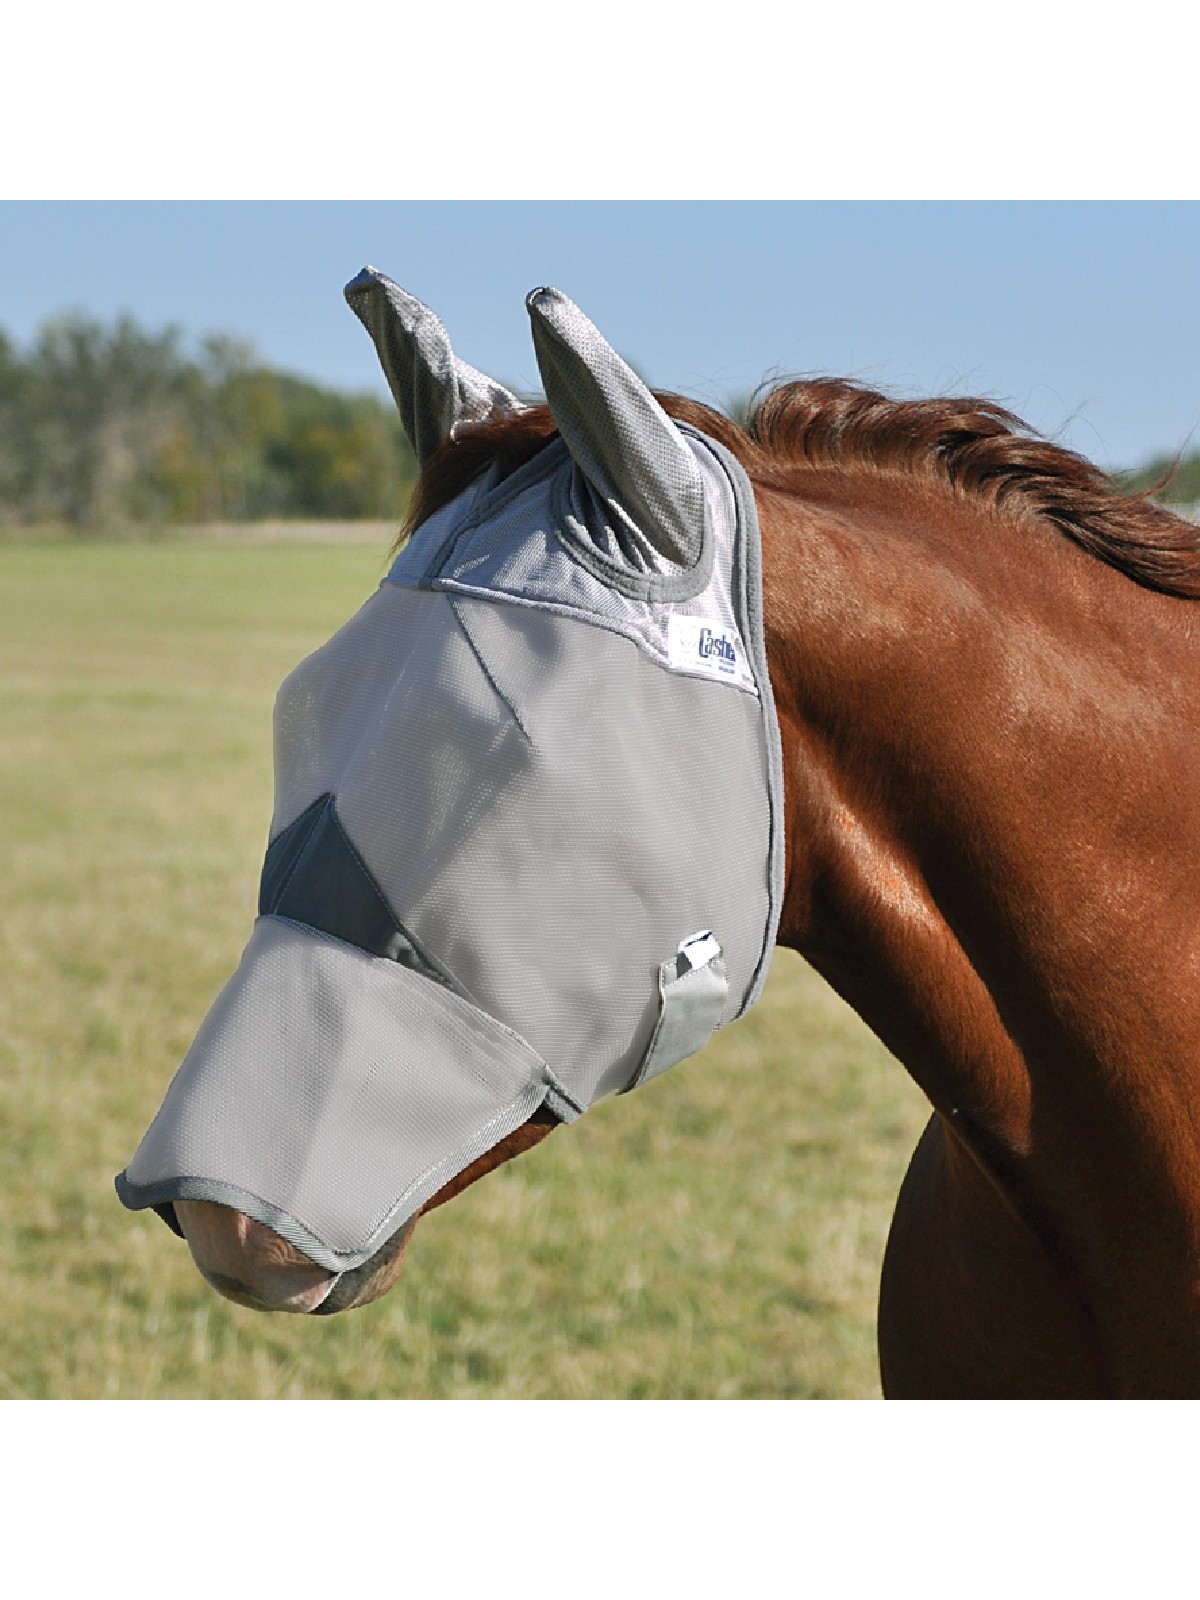 Crusader Fly Mask w. Ears / Nose